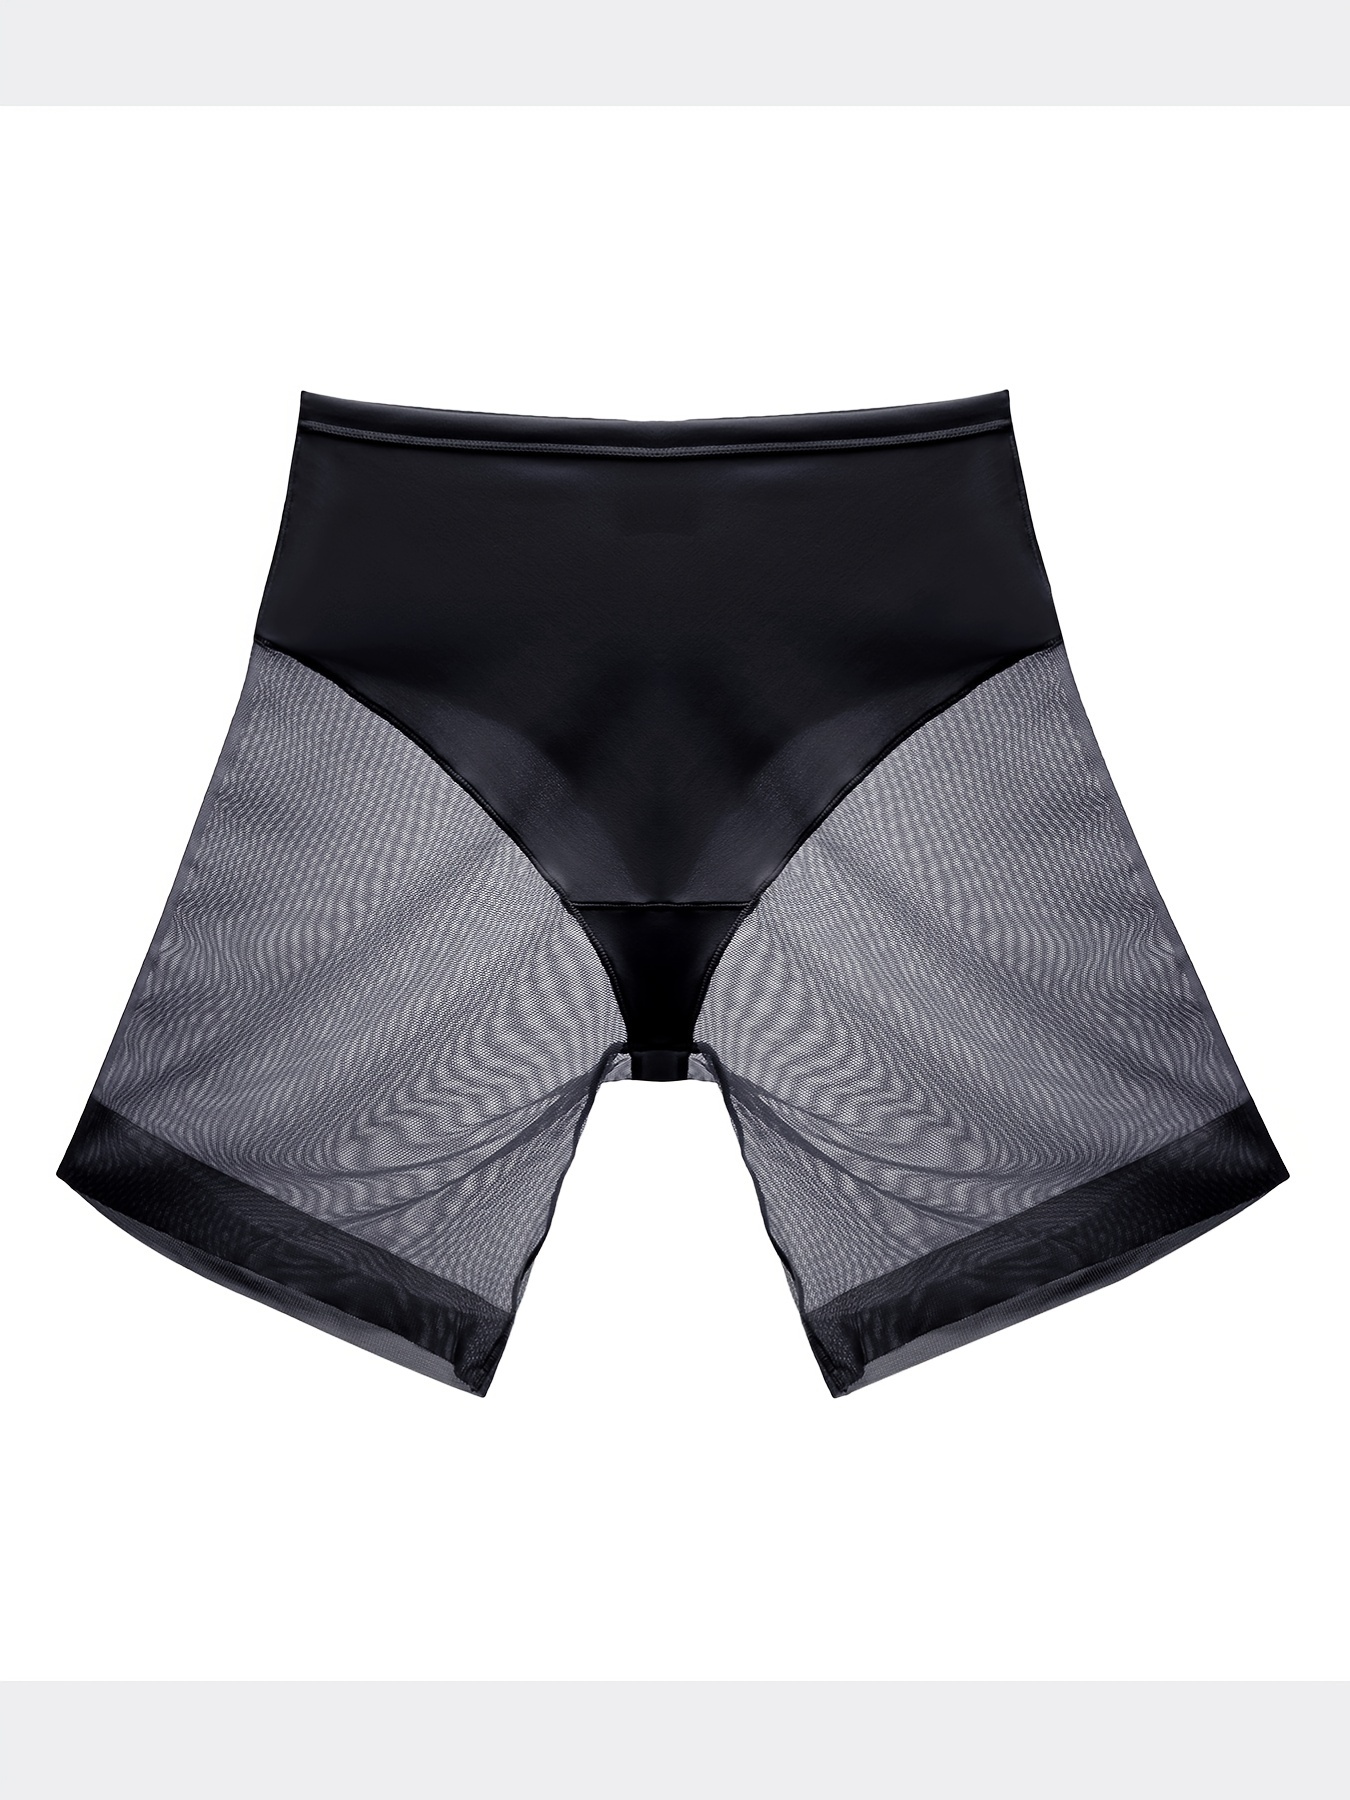 Slip Shorts For Under Dresses Seamless Boy Shorts Underwear For Women Anti  Chafing Thigh Bands